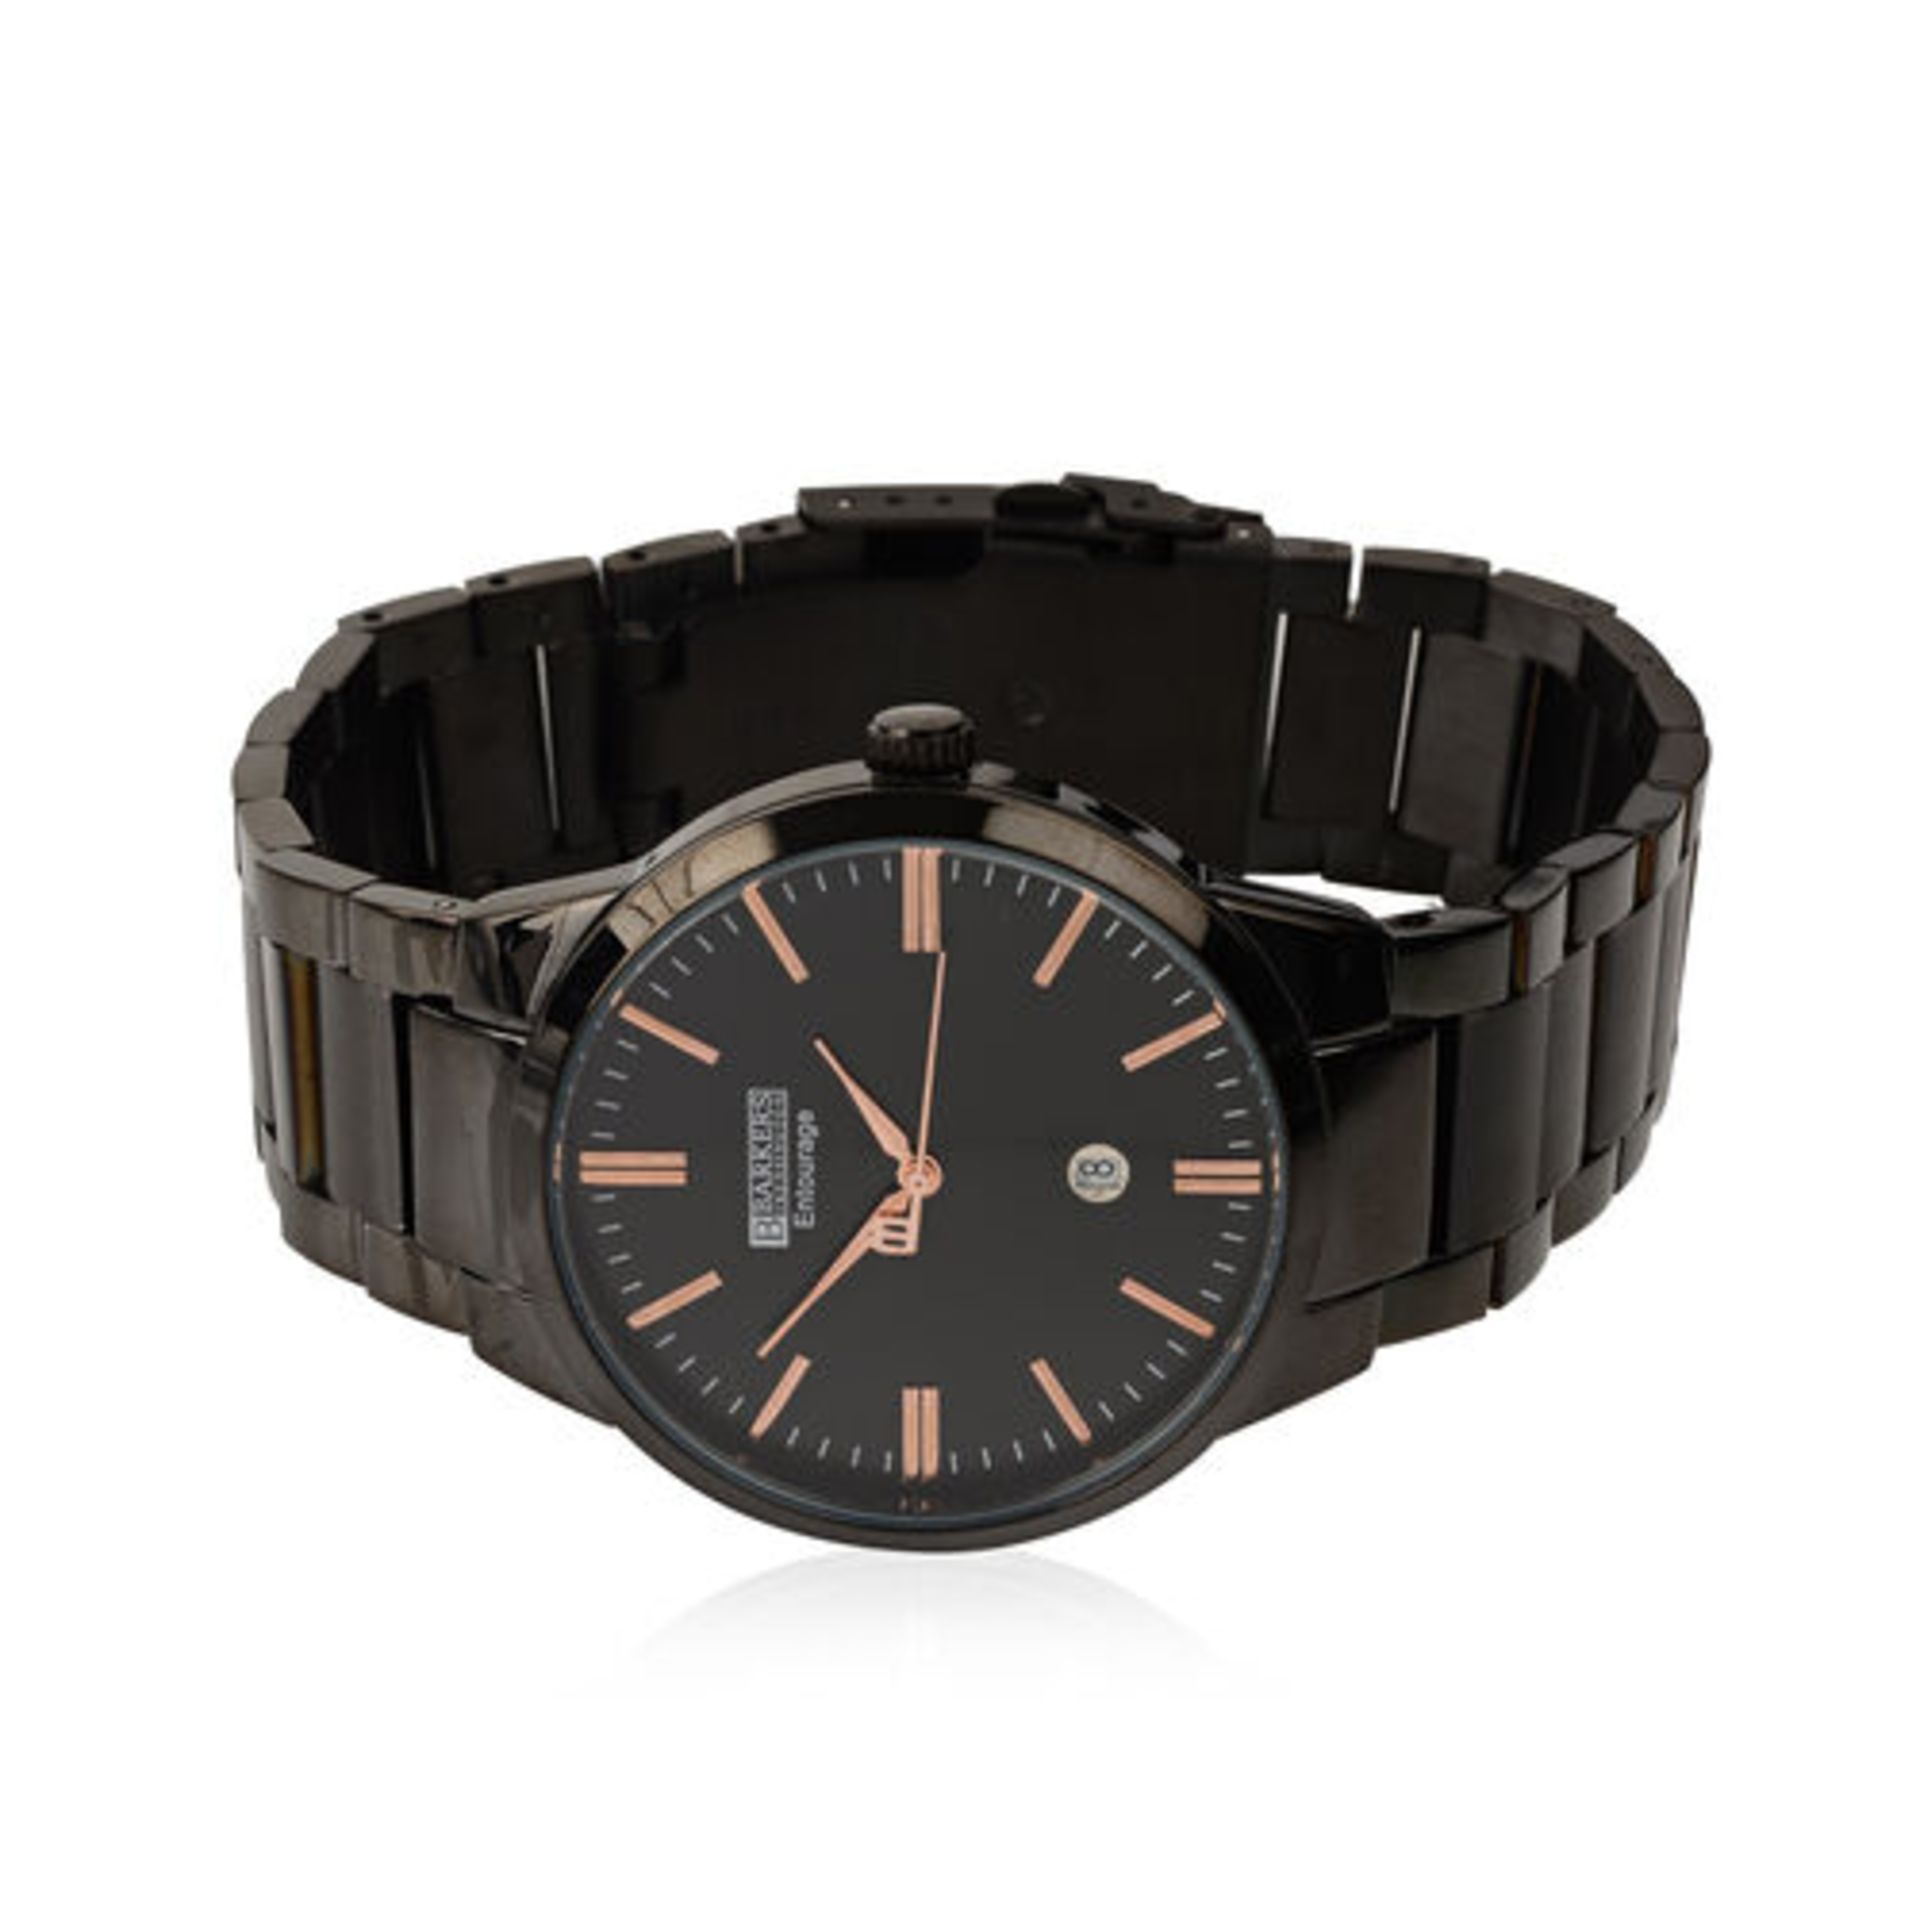 Barkers of Kensington Entourage Black Face with Rose Gold  Men's stylish Watch, new and boxed.